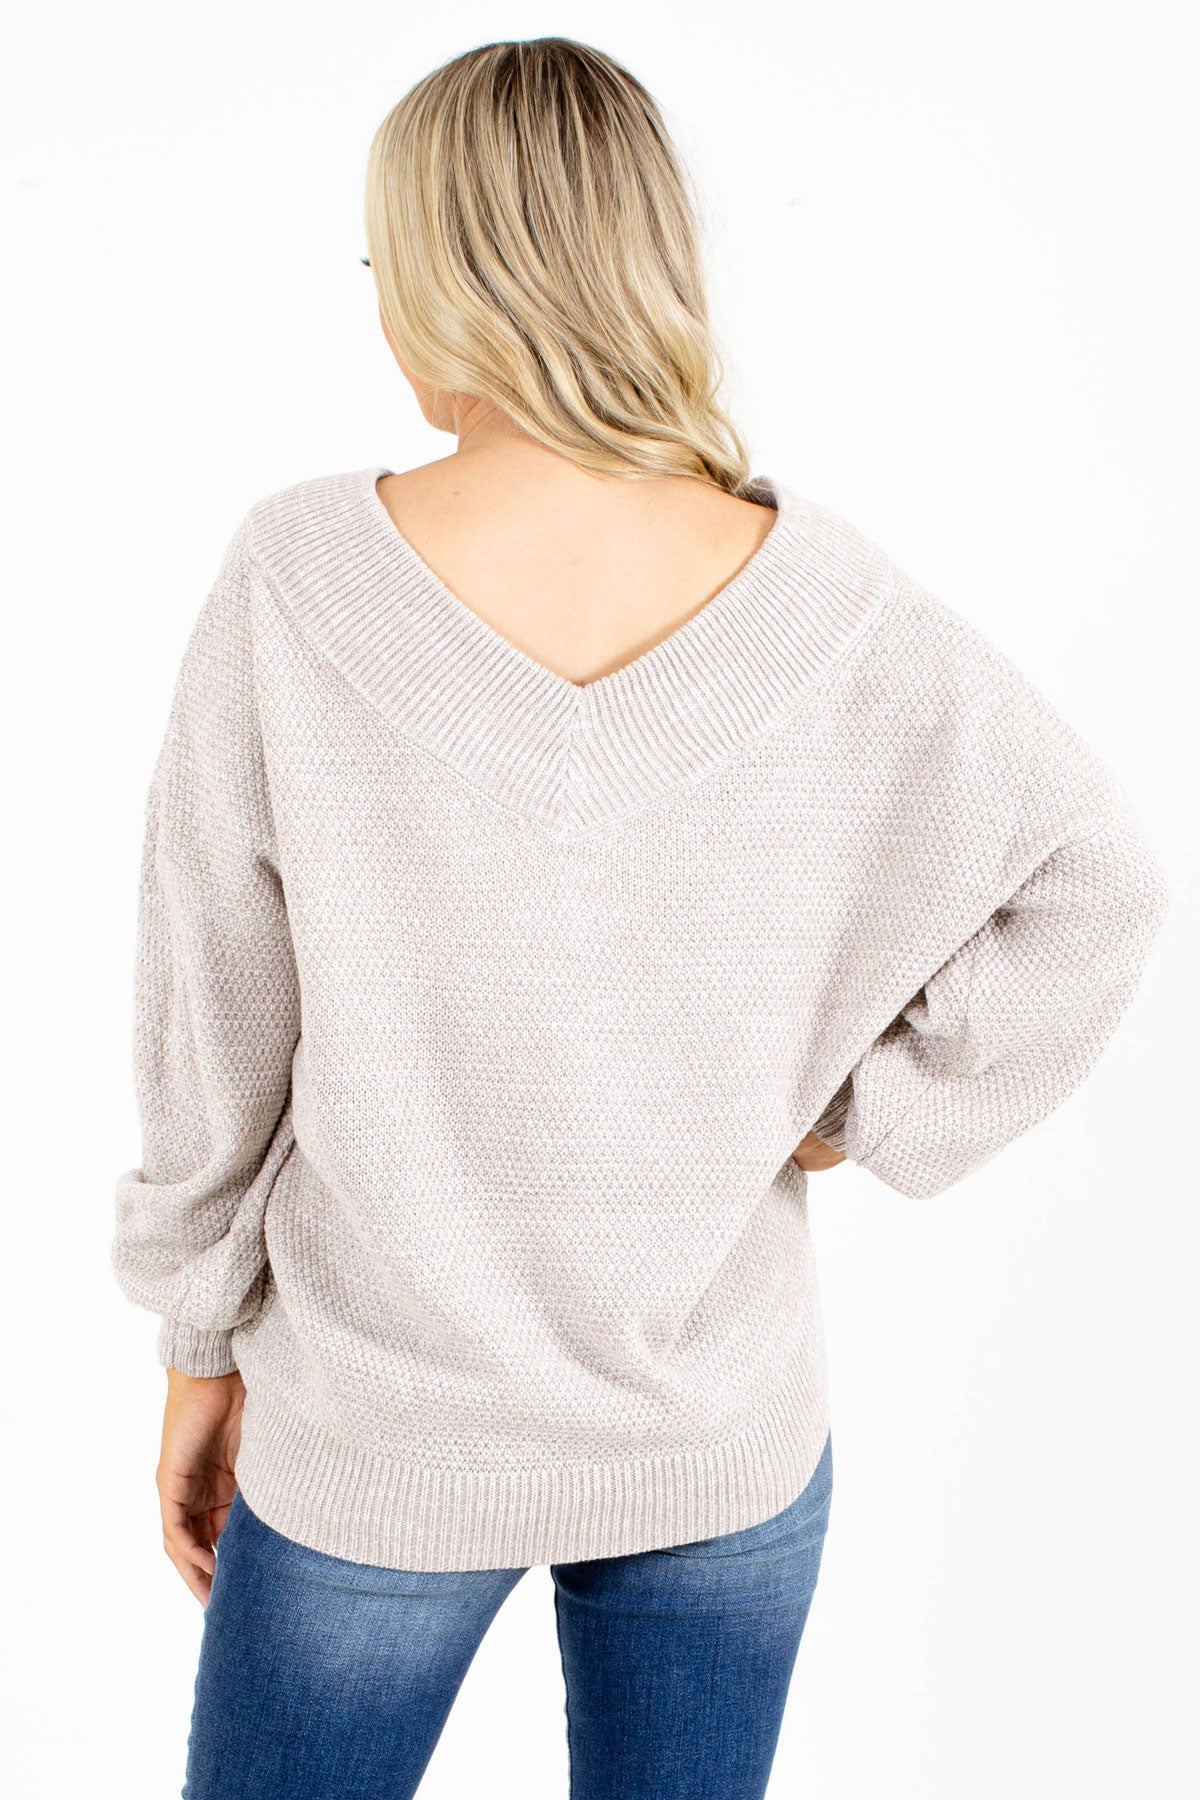 Women's Gray Cozy and Warm Boutique Sweater